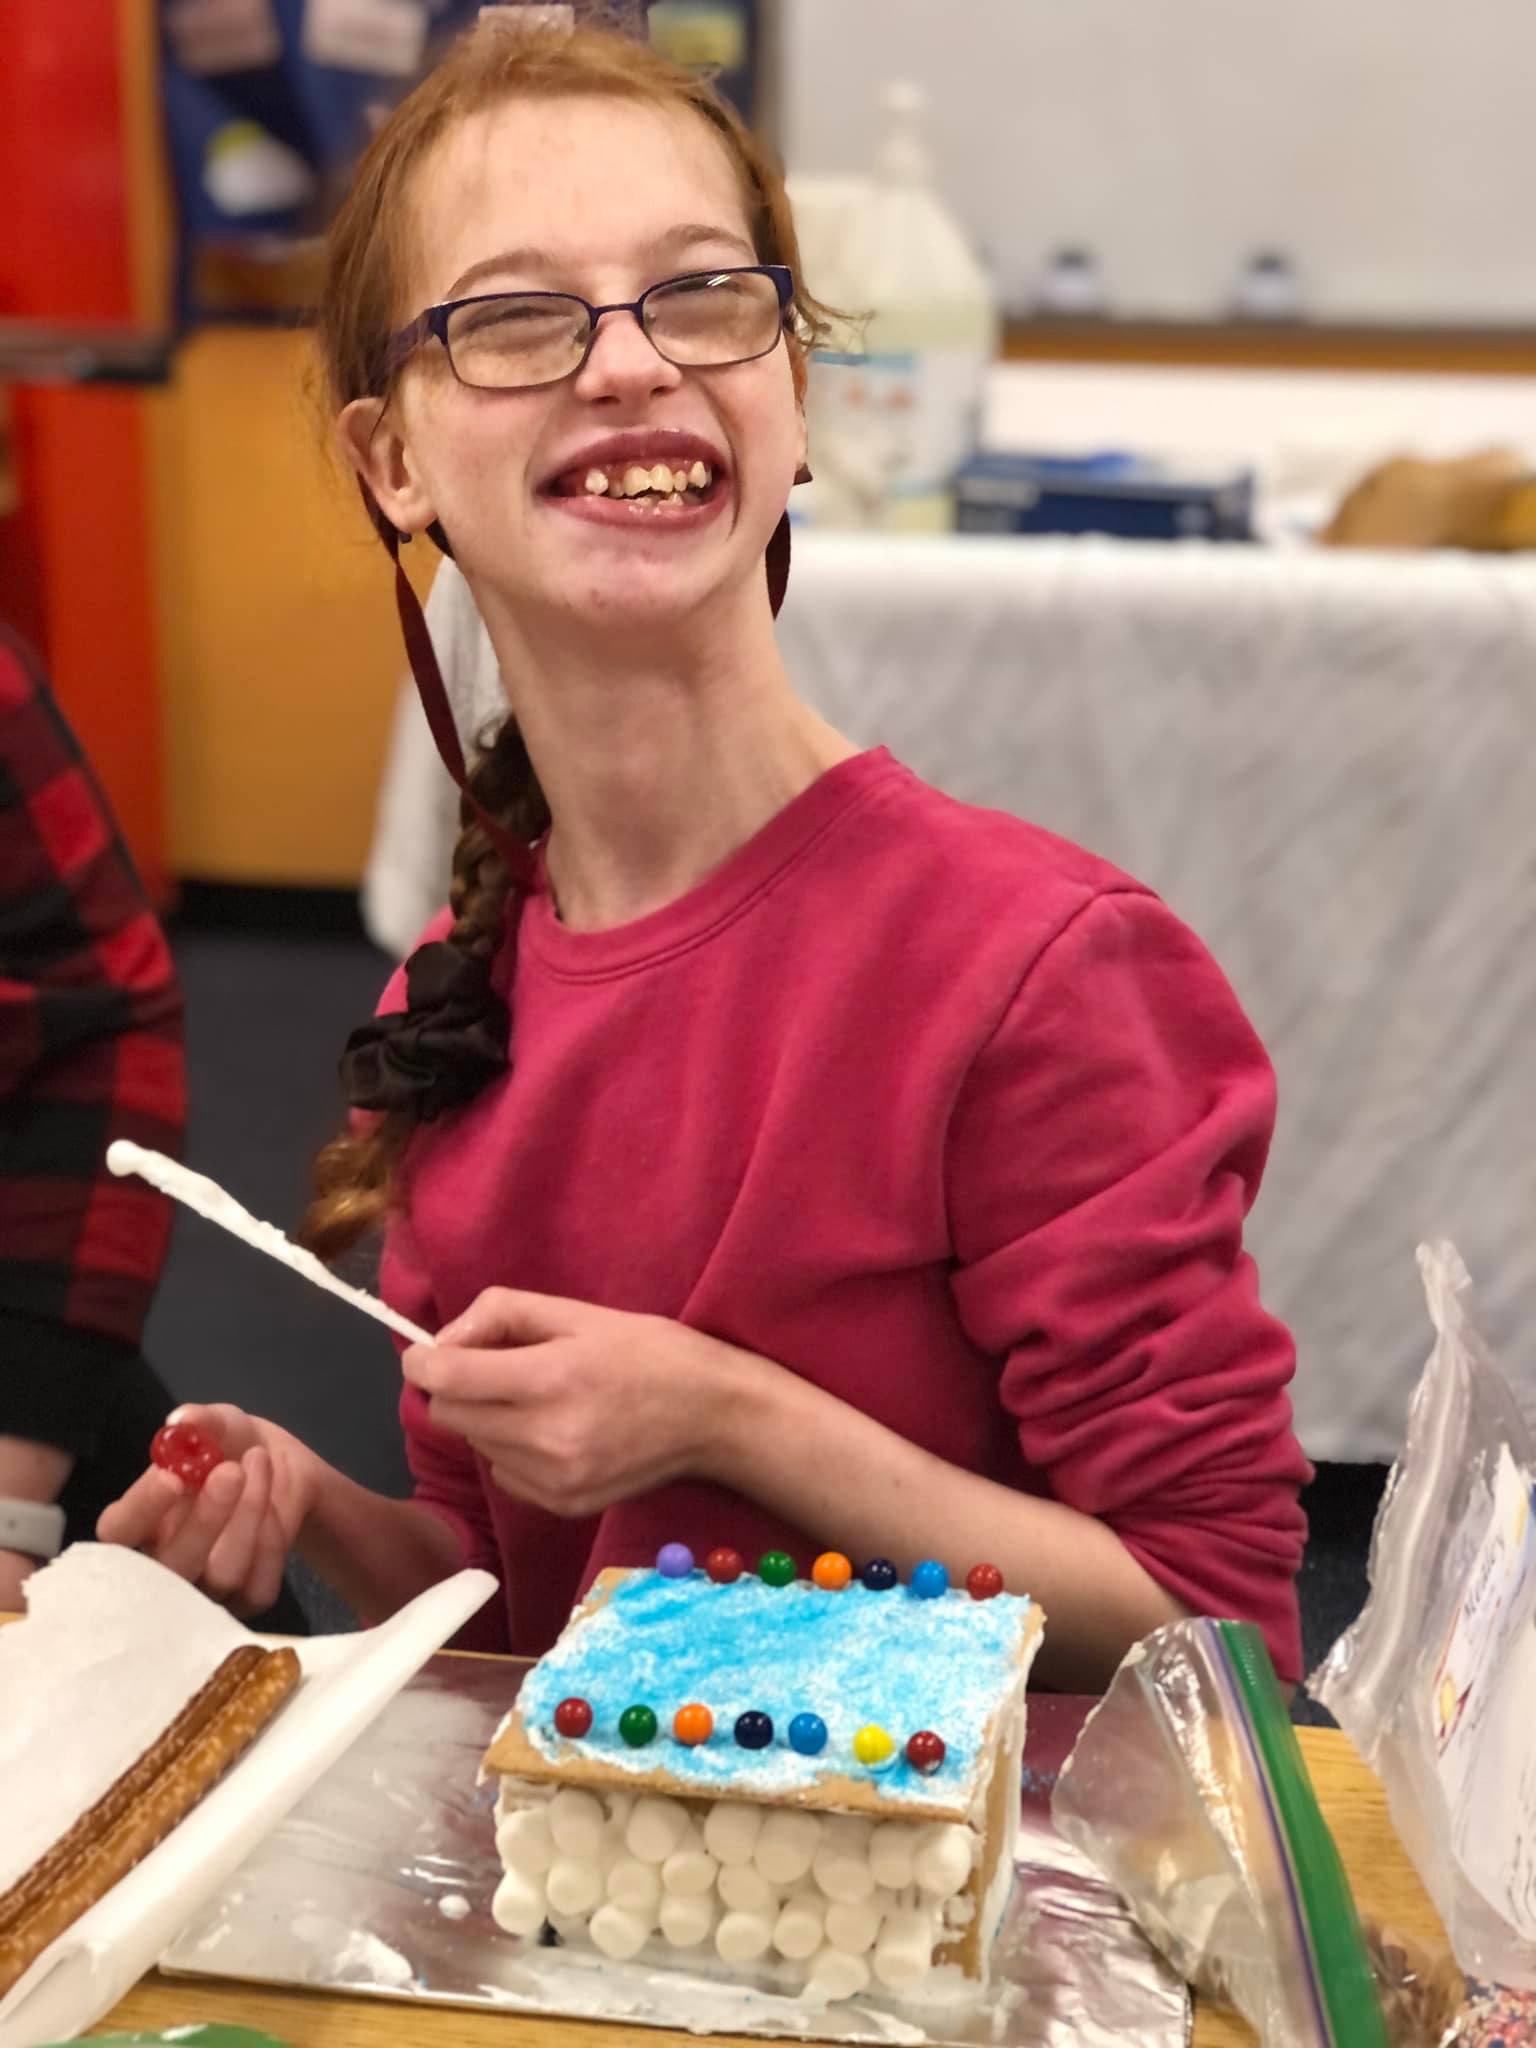 A teenage girl in a pink shirt and glasses smiles while building a gingerbread house.